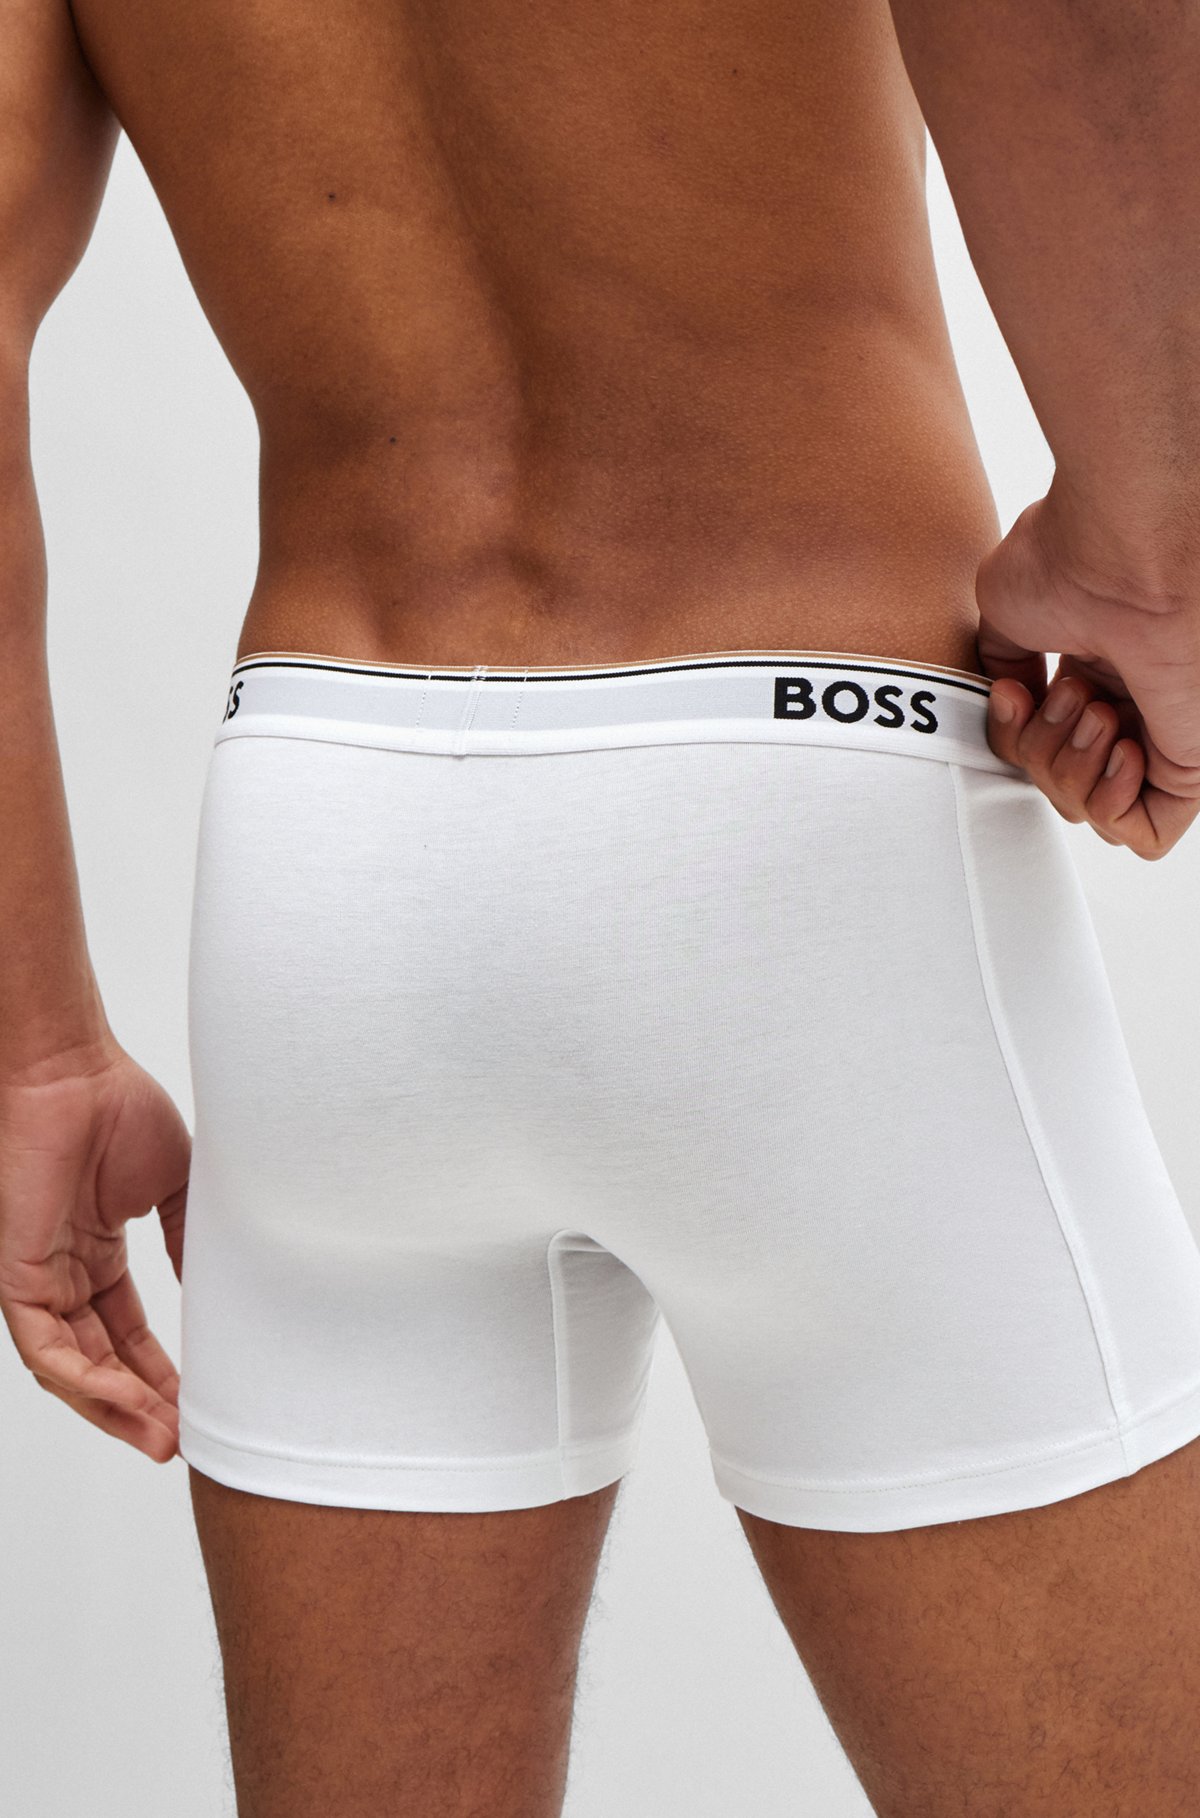 stretch-cotton briefs BOSS of boxer logos Three-pack with -